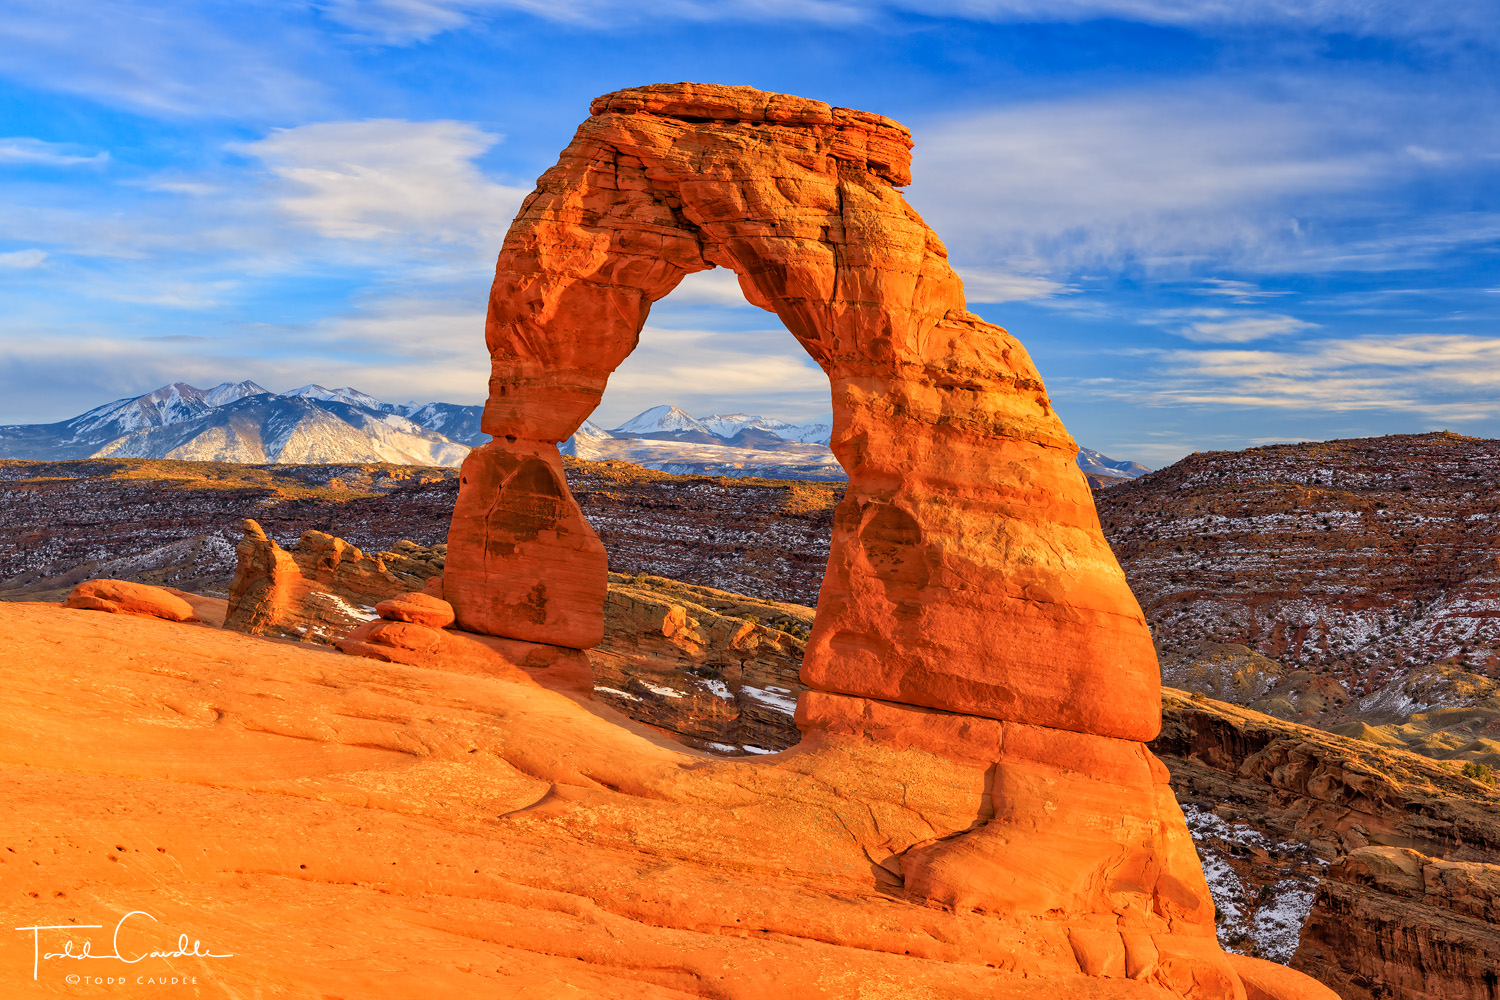 The hike to Delicate Arch for sunset is one of the most popular destinations in Arches National Park, and for good reason. The...